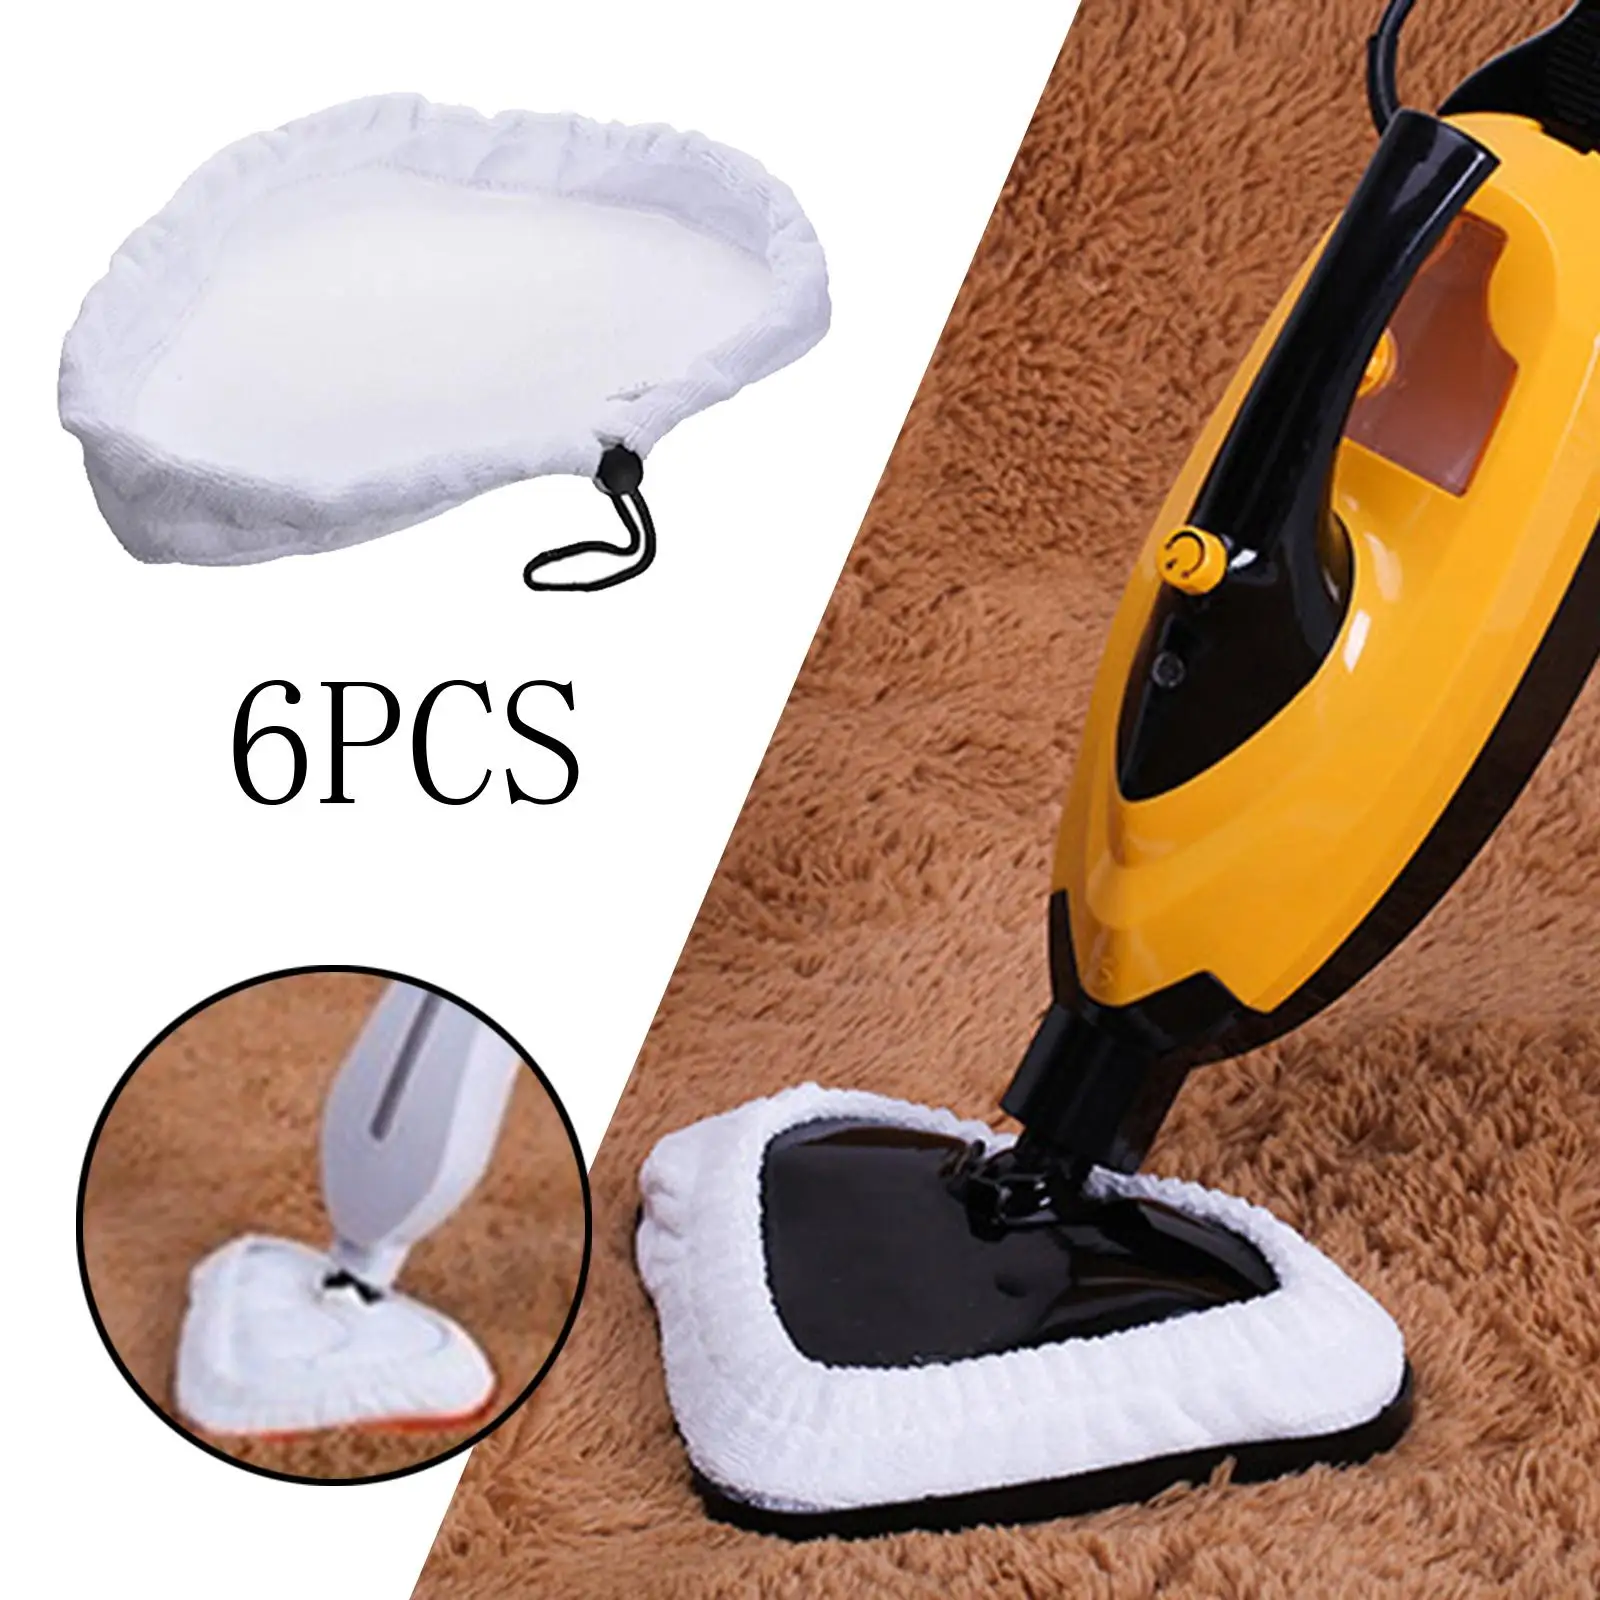 6Pcs Steam Mop Pad Floor Cleaning Pad Washable for X5 S302 S001 Steam Mop